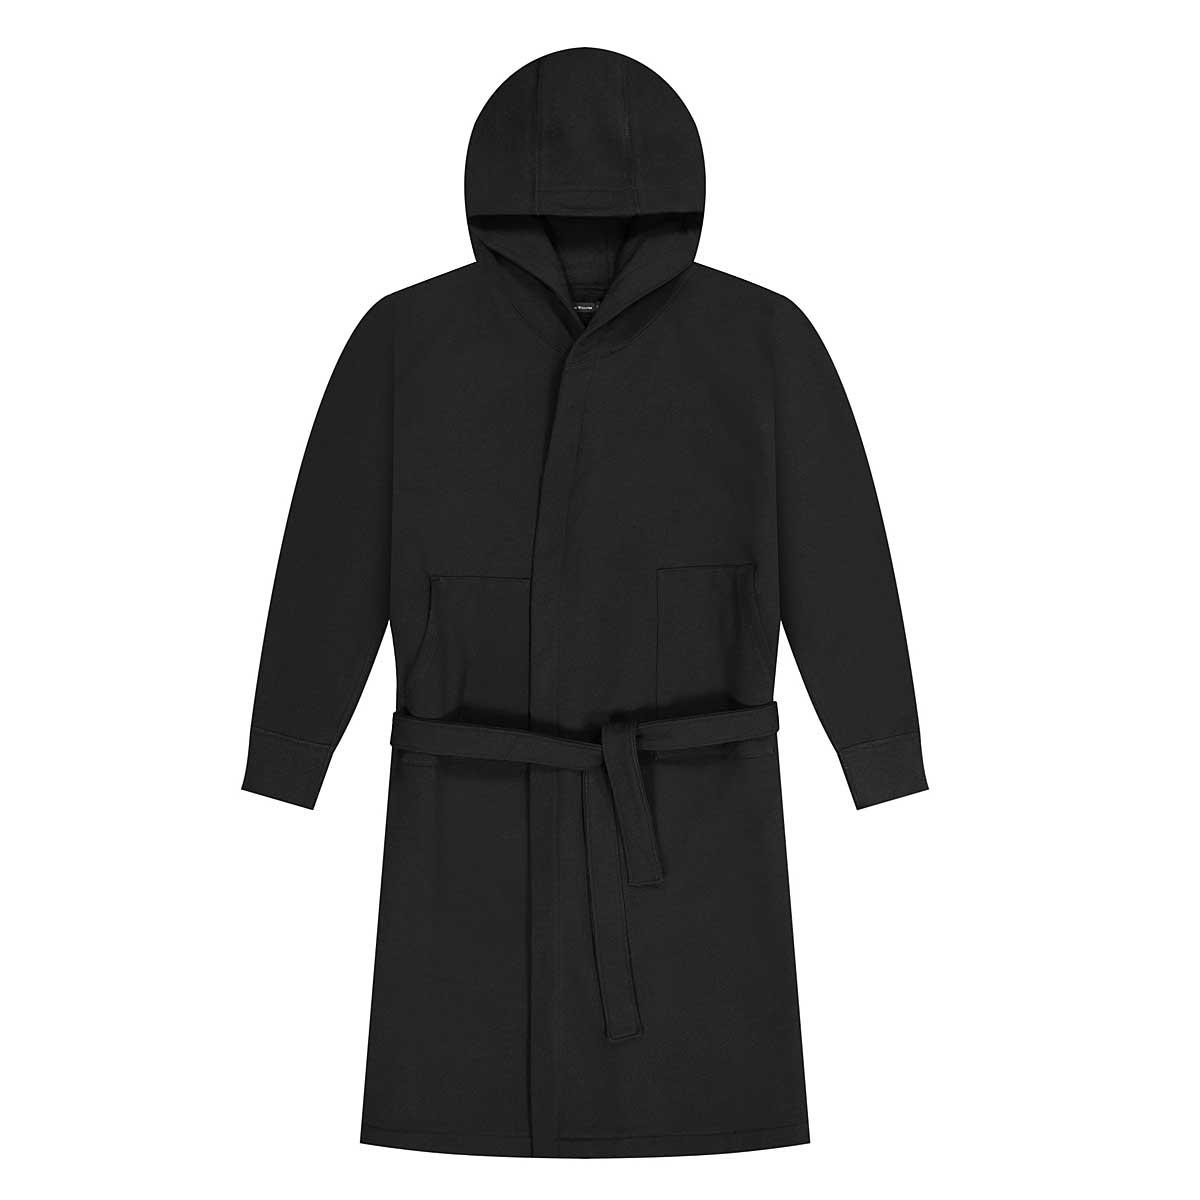 Raised By Wolves Boxing Robe, Black